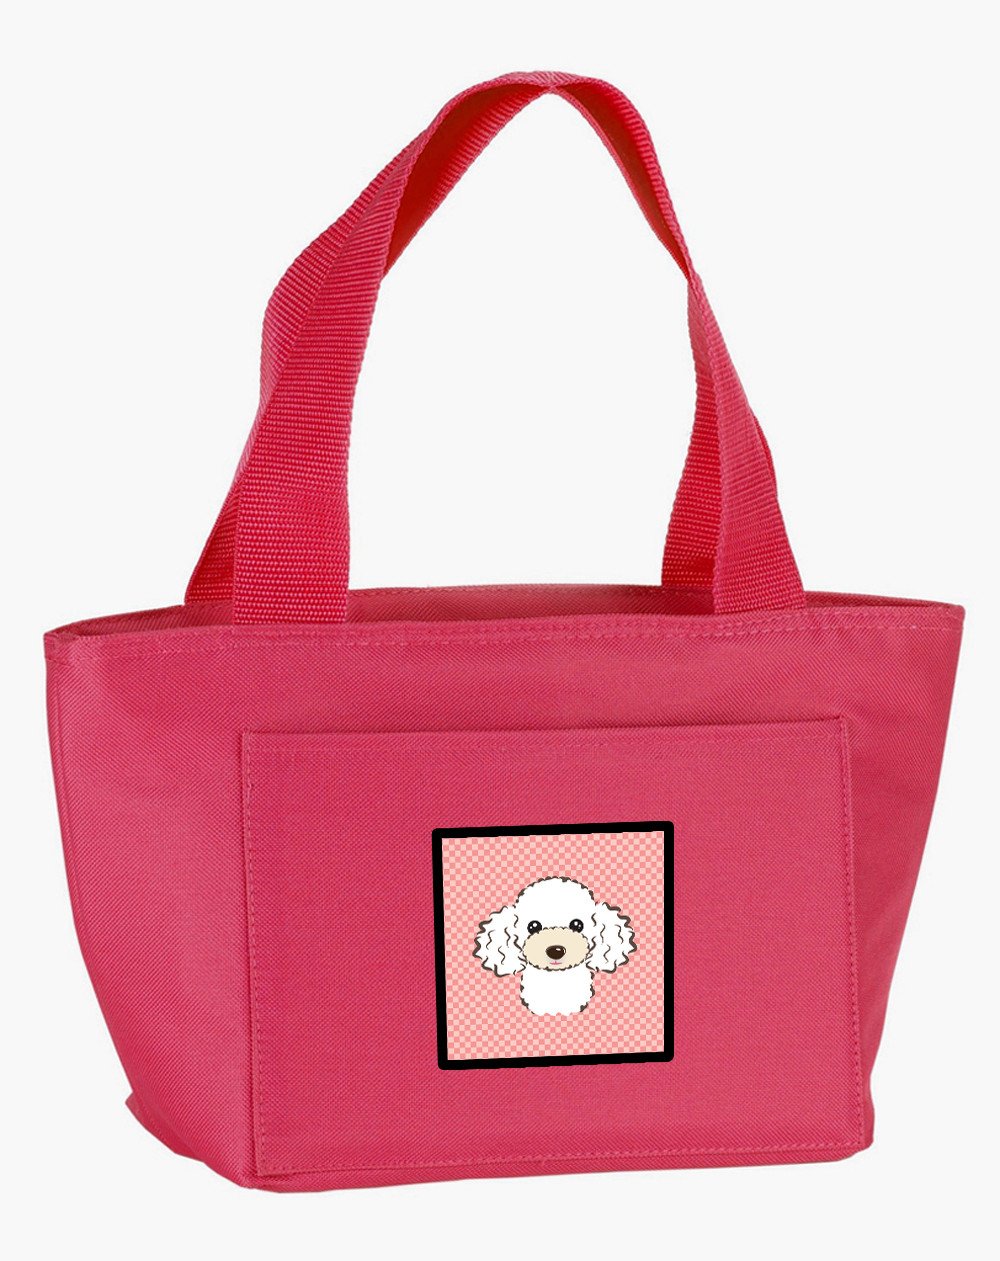 Checkerboard Pink White Poodle Lunch Bag BB1257PK-8808 by Caroline's Treasures